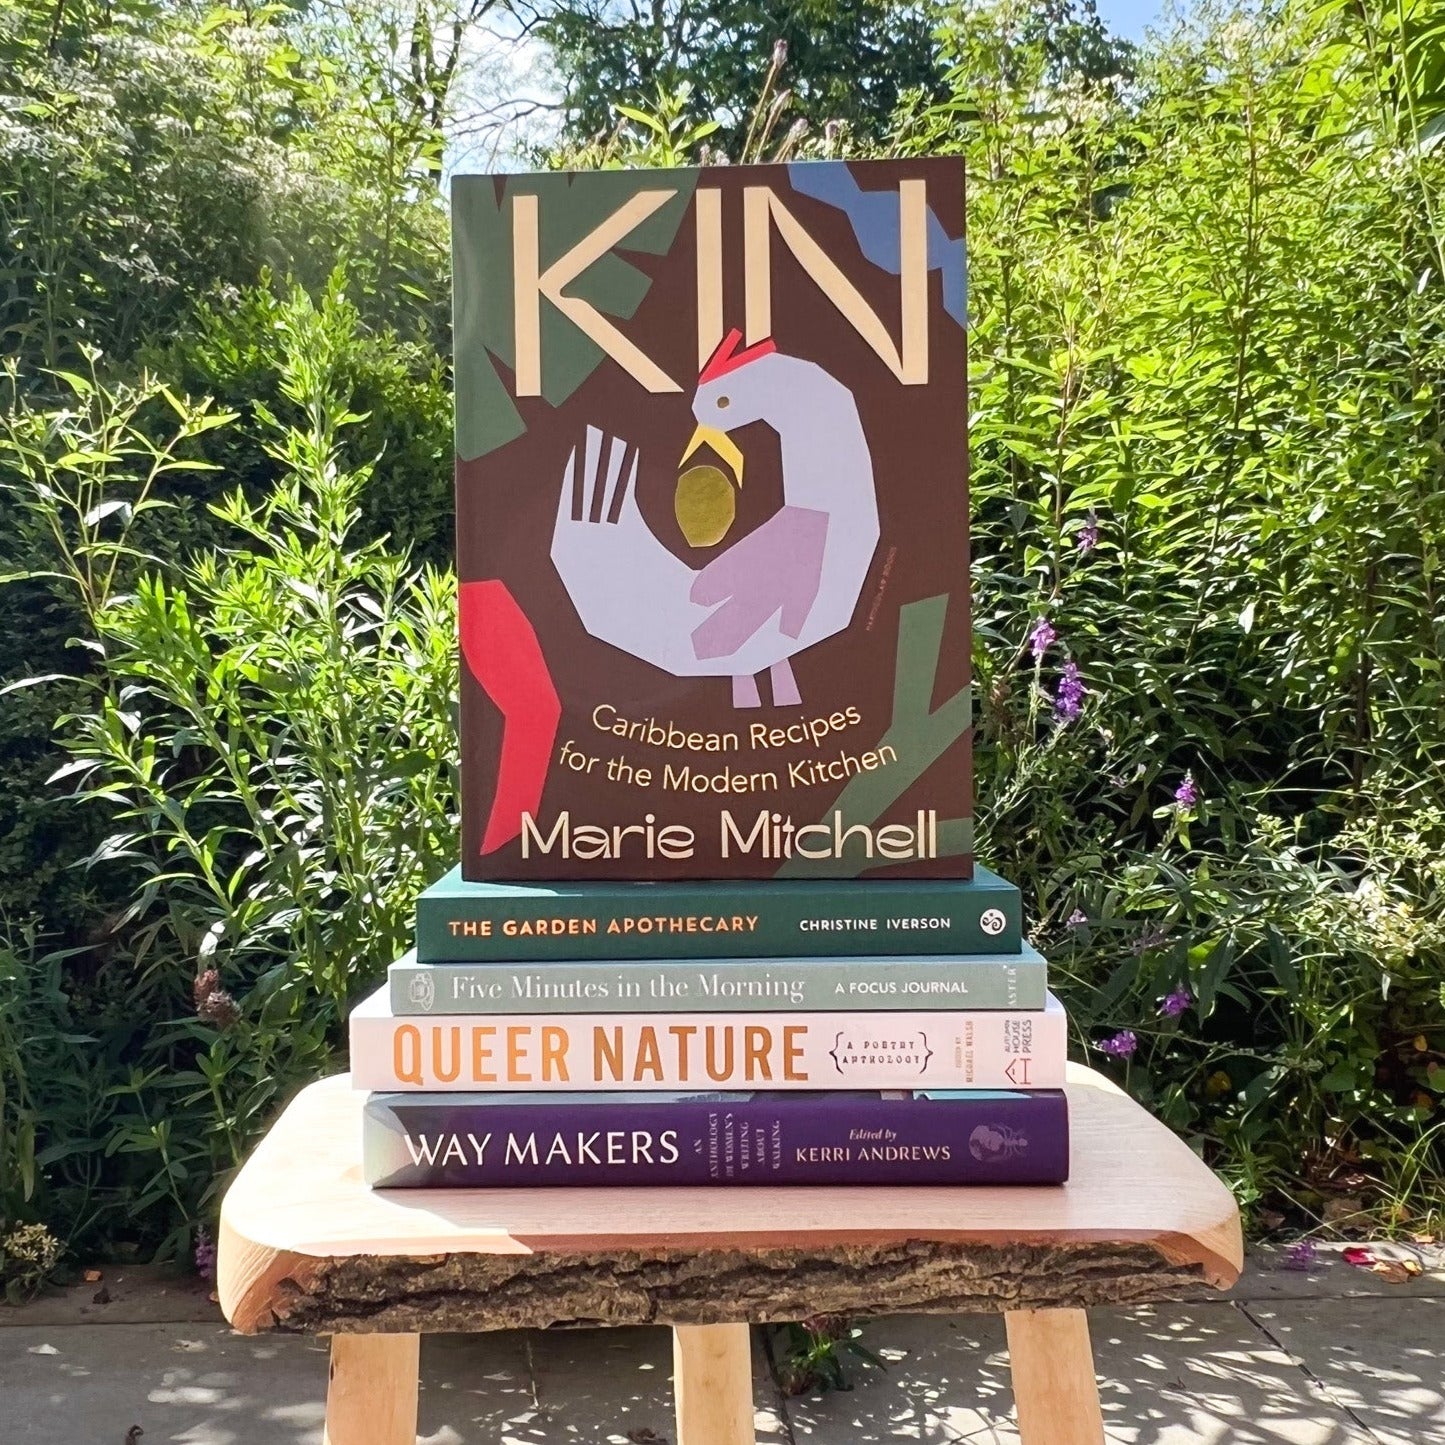 A carribbean cookbook stood upright on top of a stack of other books, in front of a garden setting.